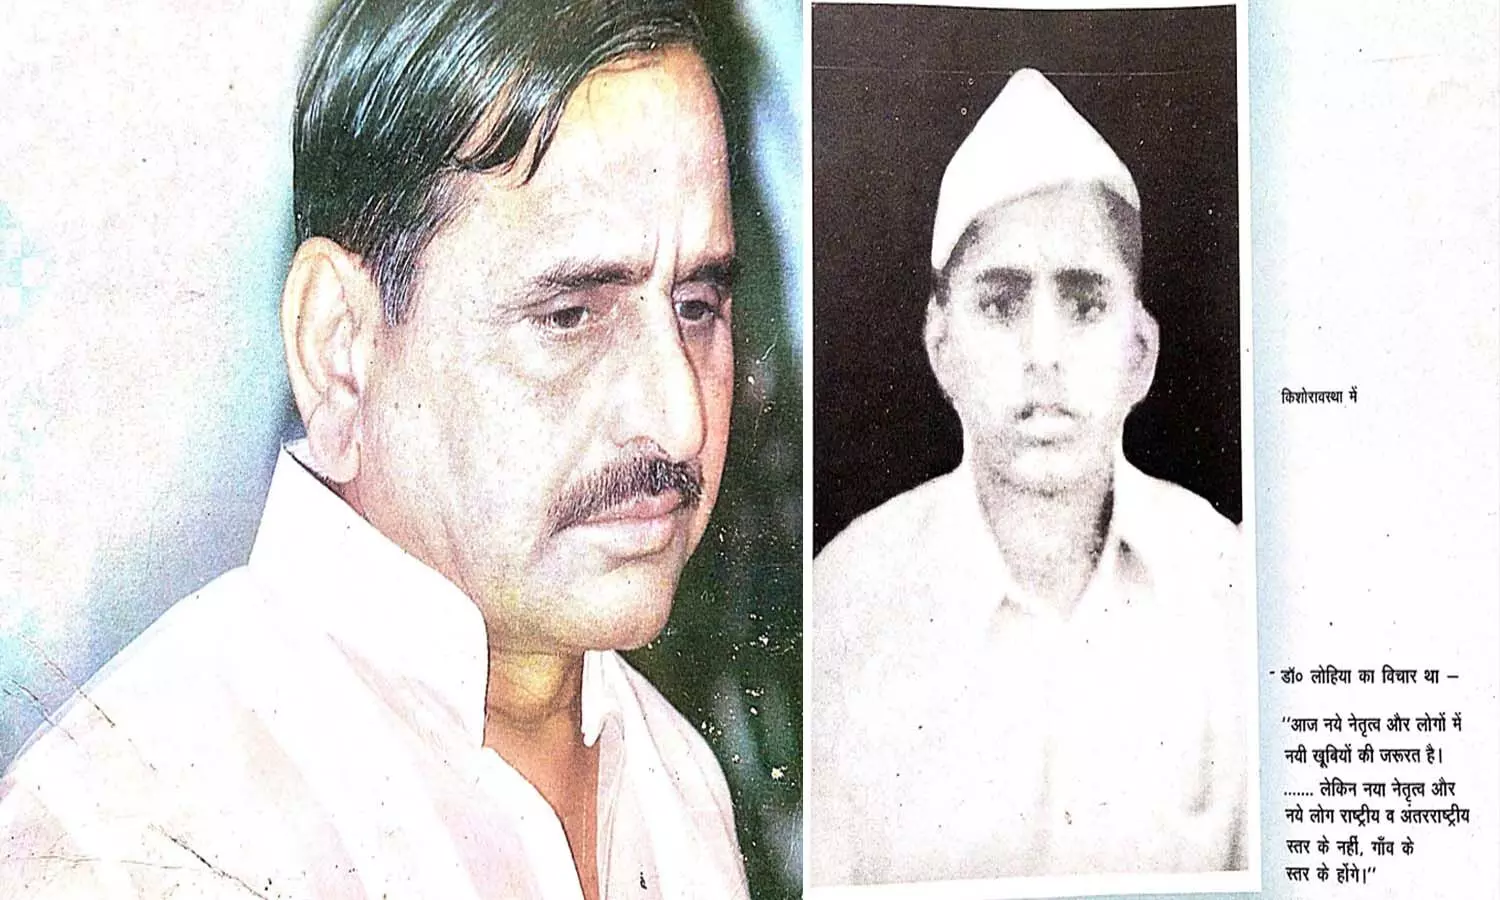 Memorable pictures of Mulayam, which you may not have seen